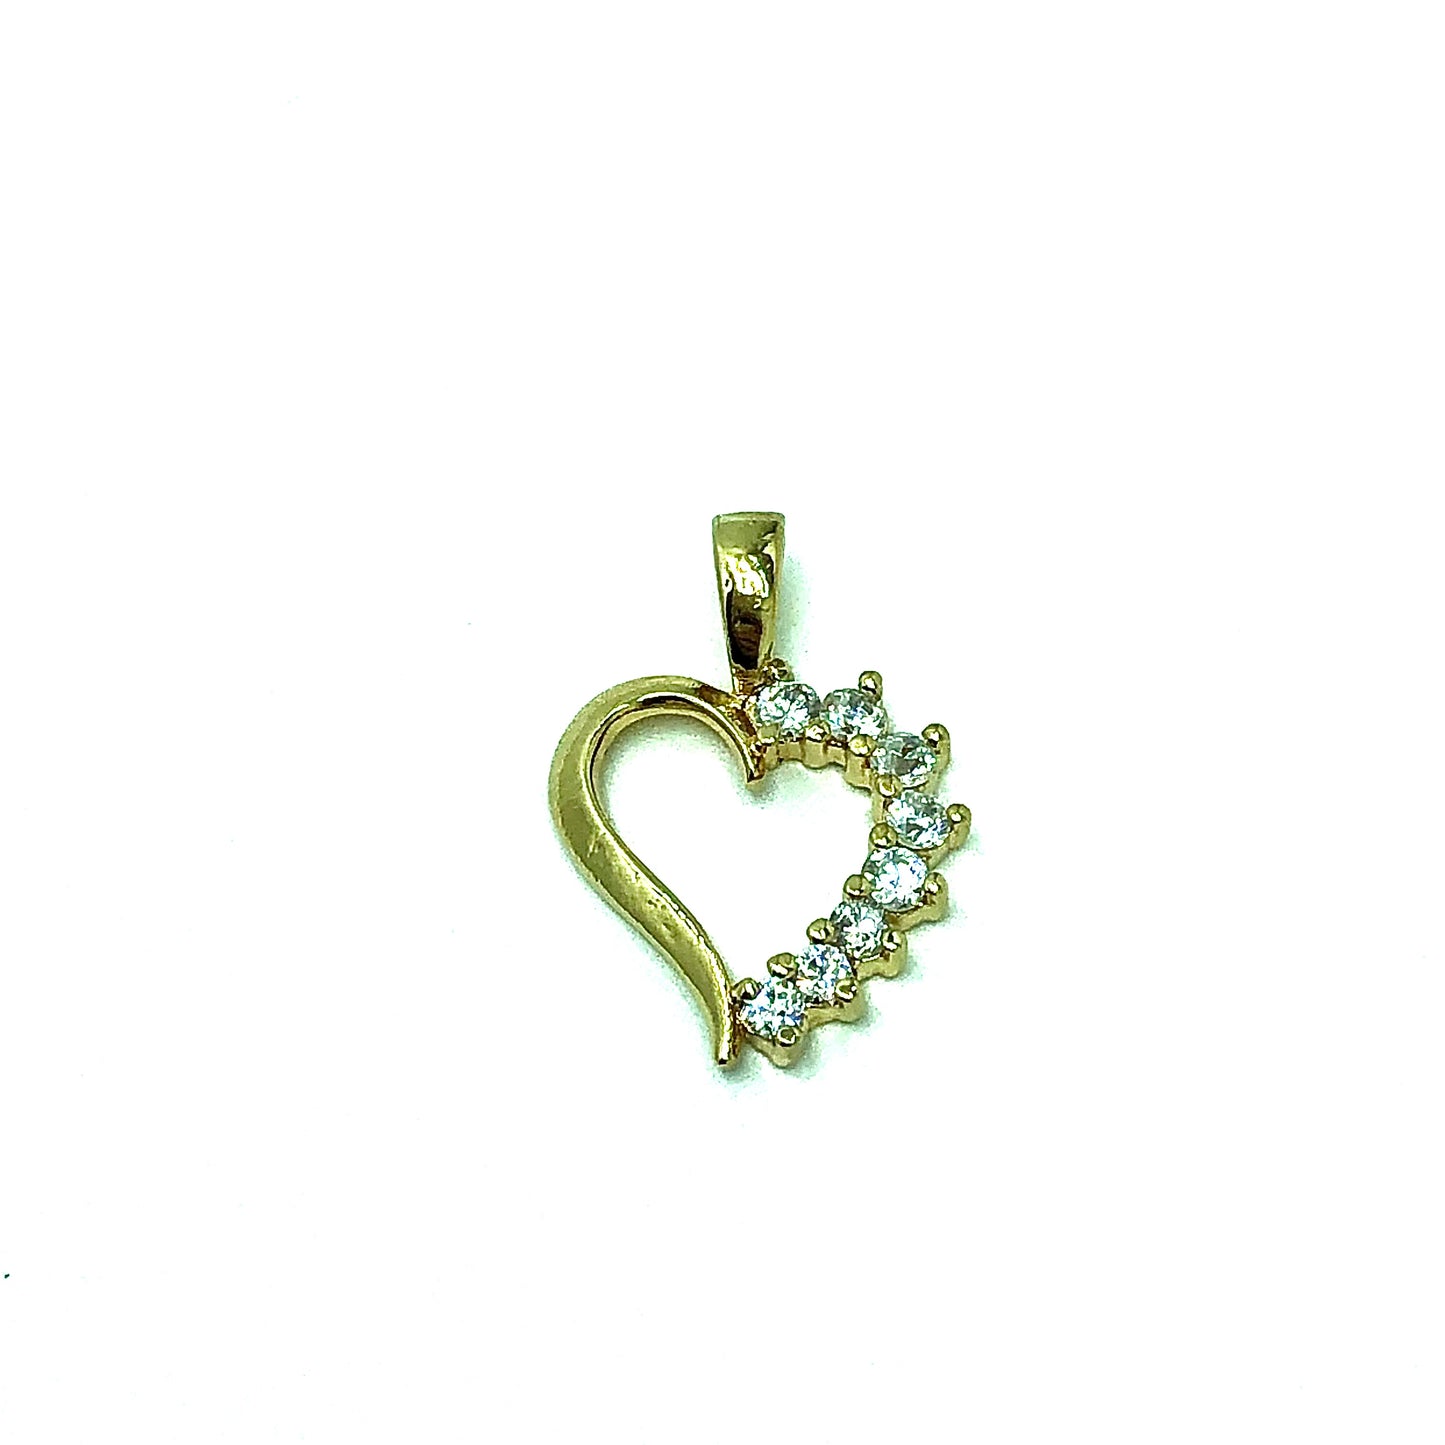 Perfectly Imperfect | 14k Gold Sterling Silver Petite White Cz Open Heart Pendant